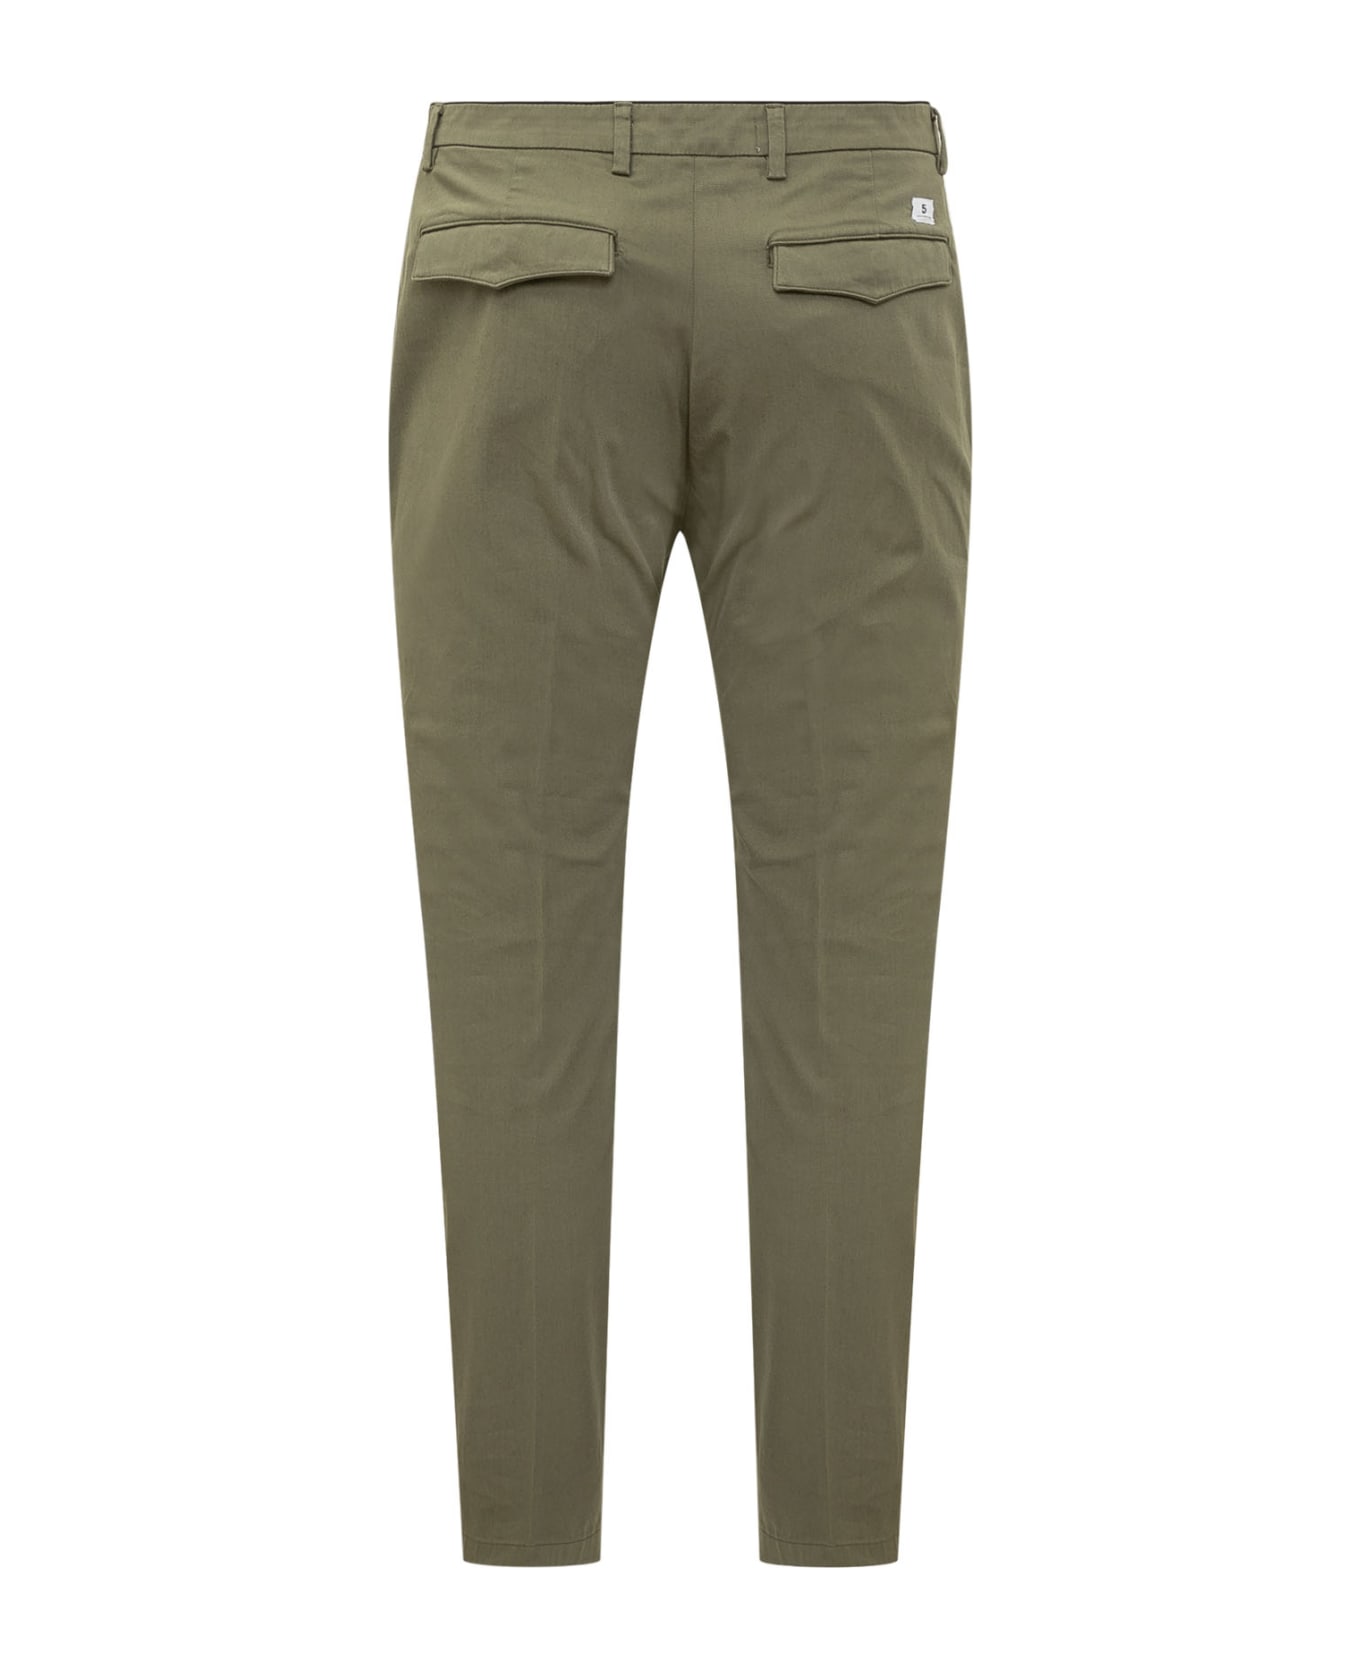 Department Five Prince Chino Pants - MILITARE ボトムス